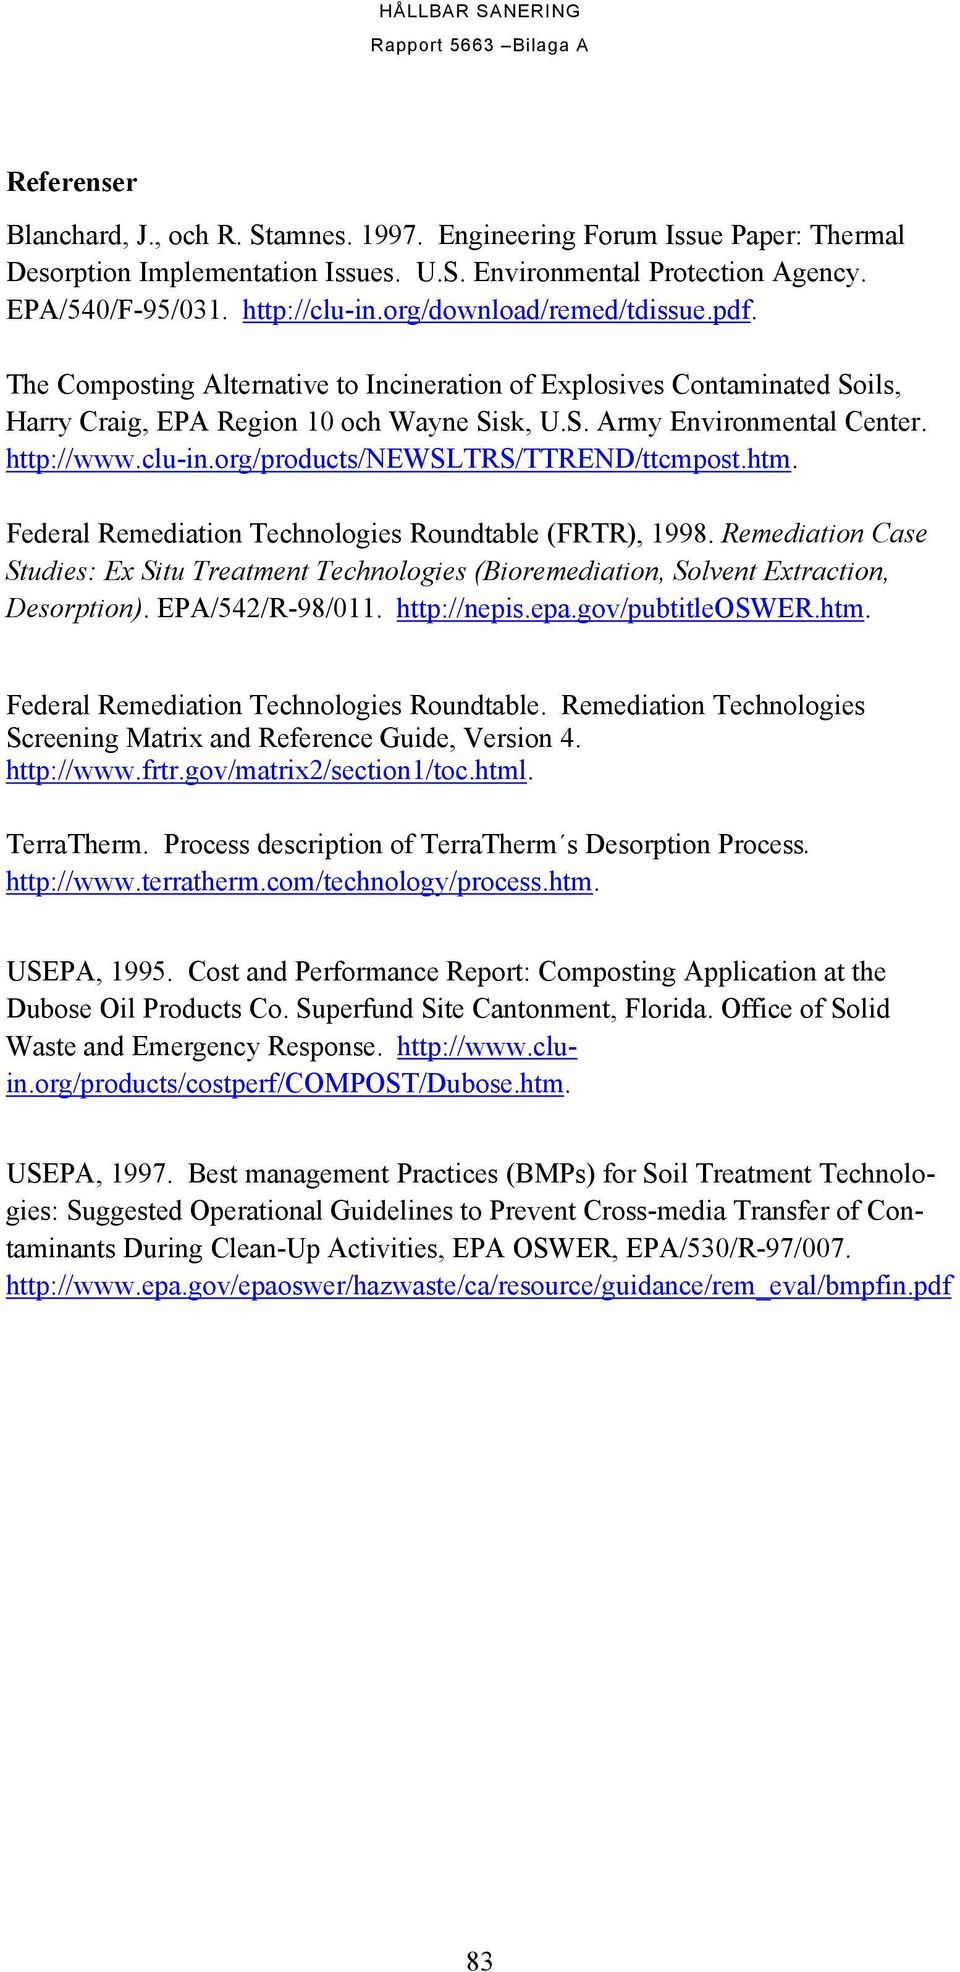 clu-in.org/products/newsltrs/ttrend/ttcmpost.htm. Federal Remediation Technologies Roundtable (FRTR), 1998.